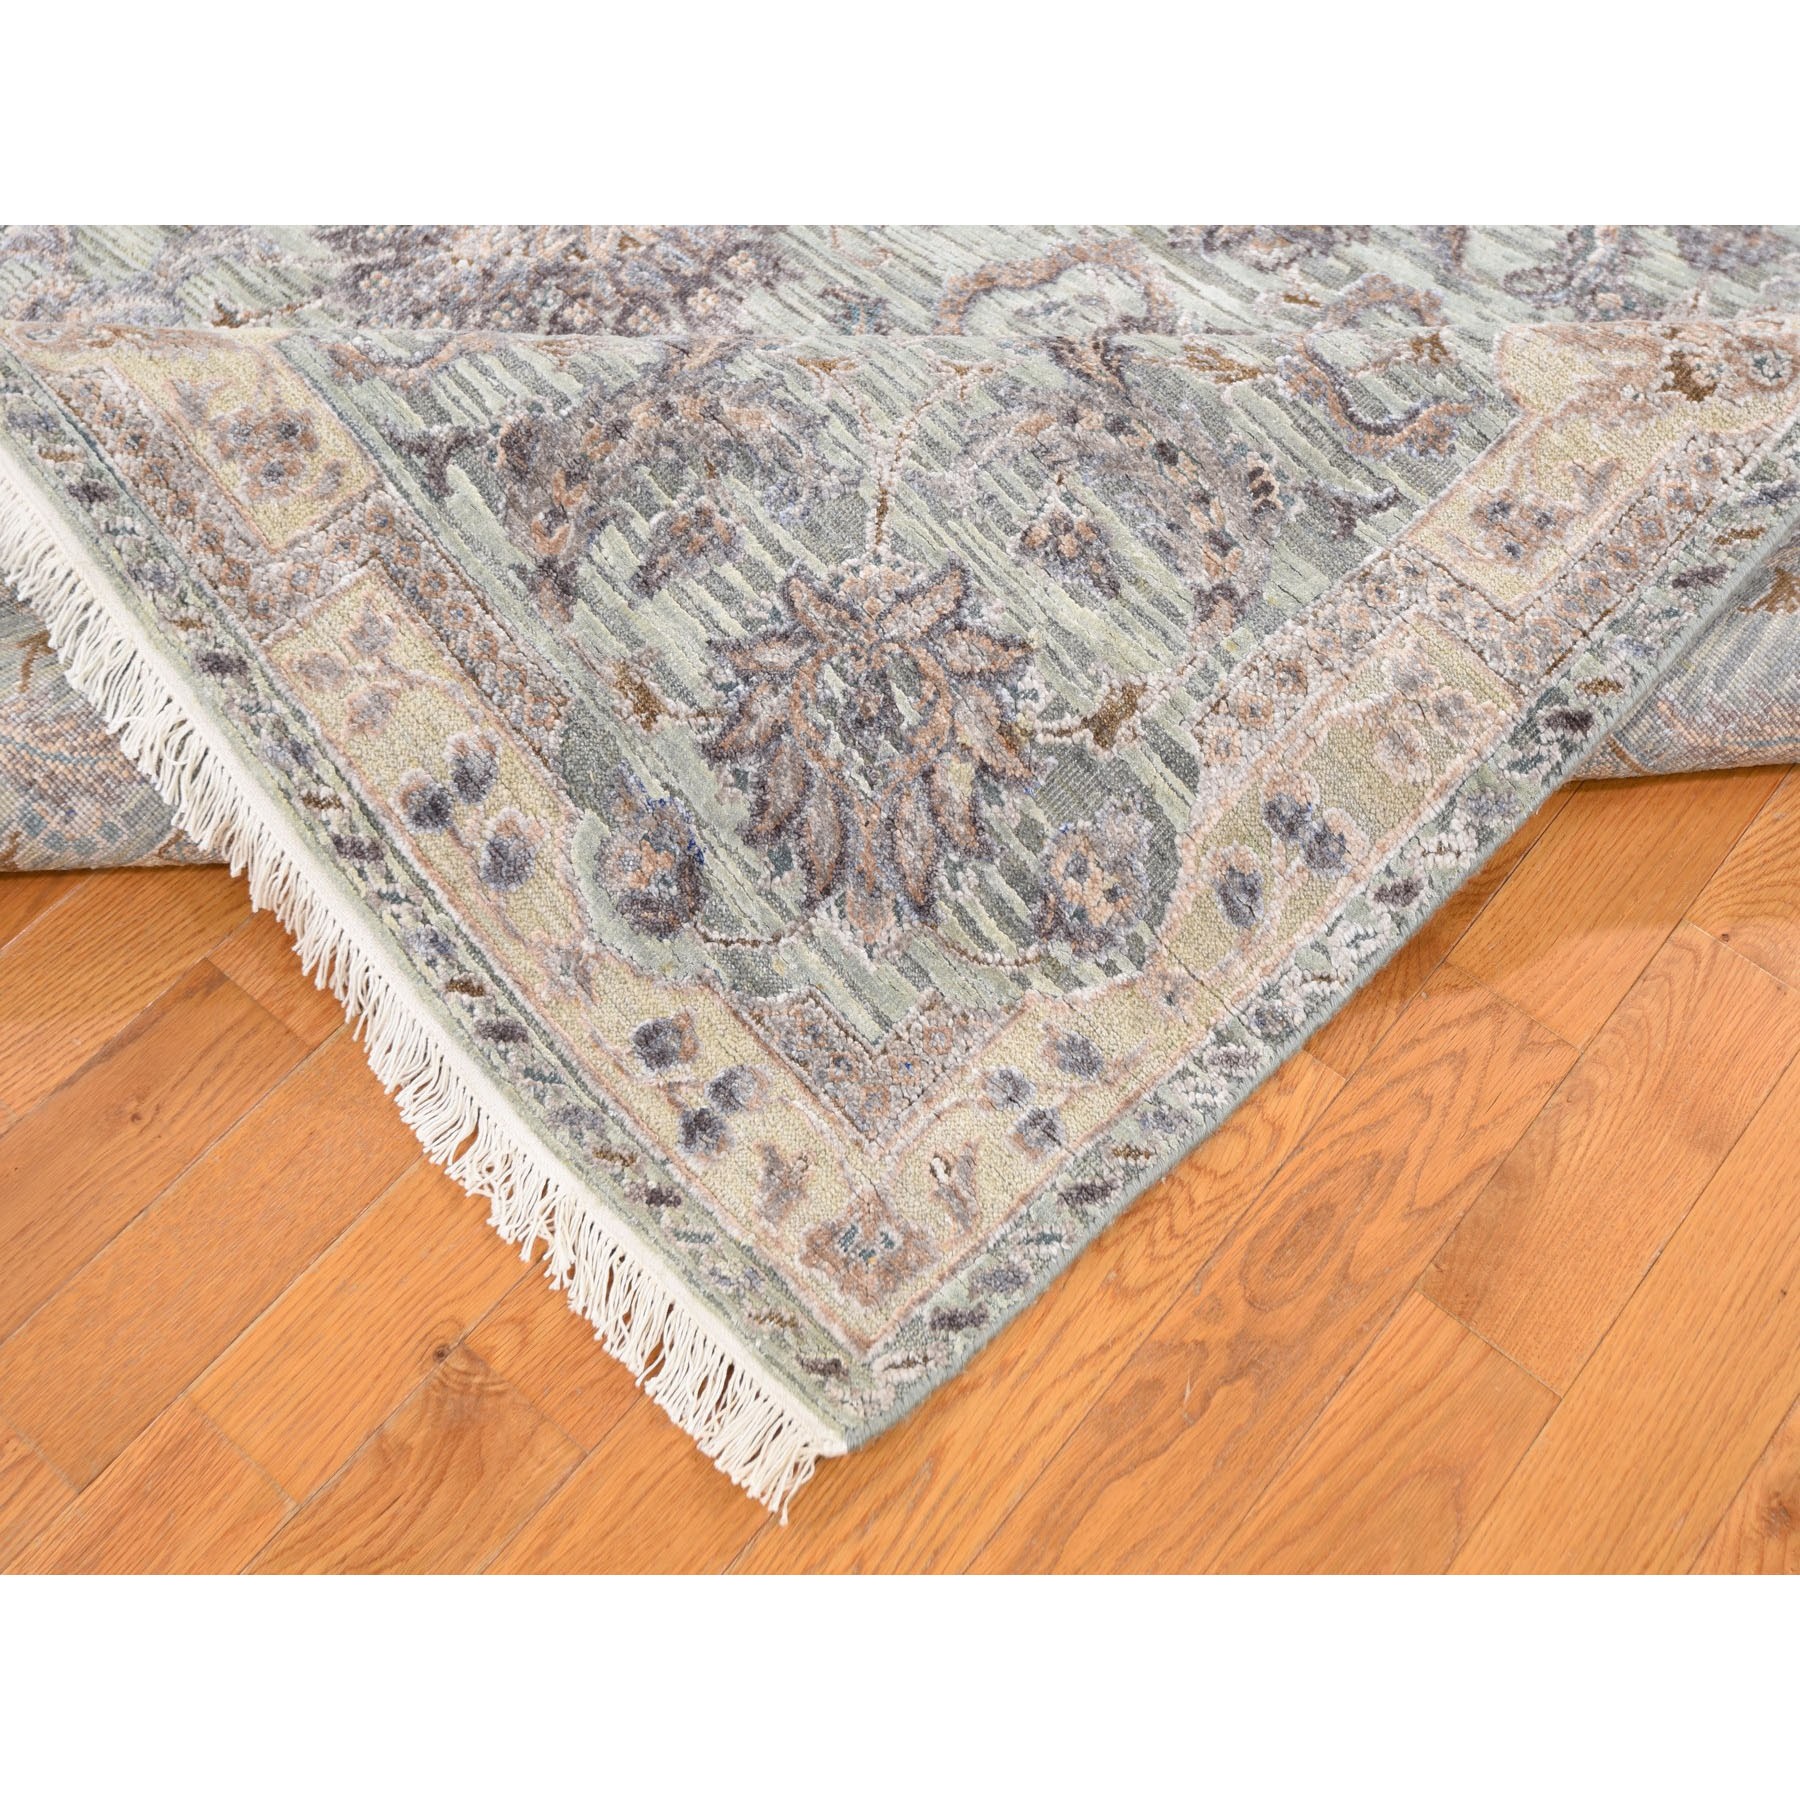 7-10 x10- Light Green Pure Silk With Textured Wool Mughal Design Hand Knotted Oriental Rug 